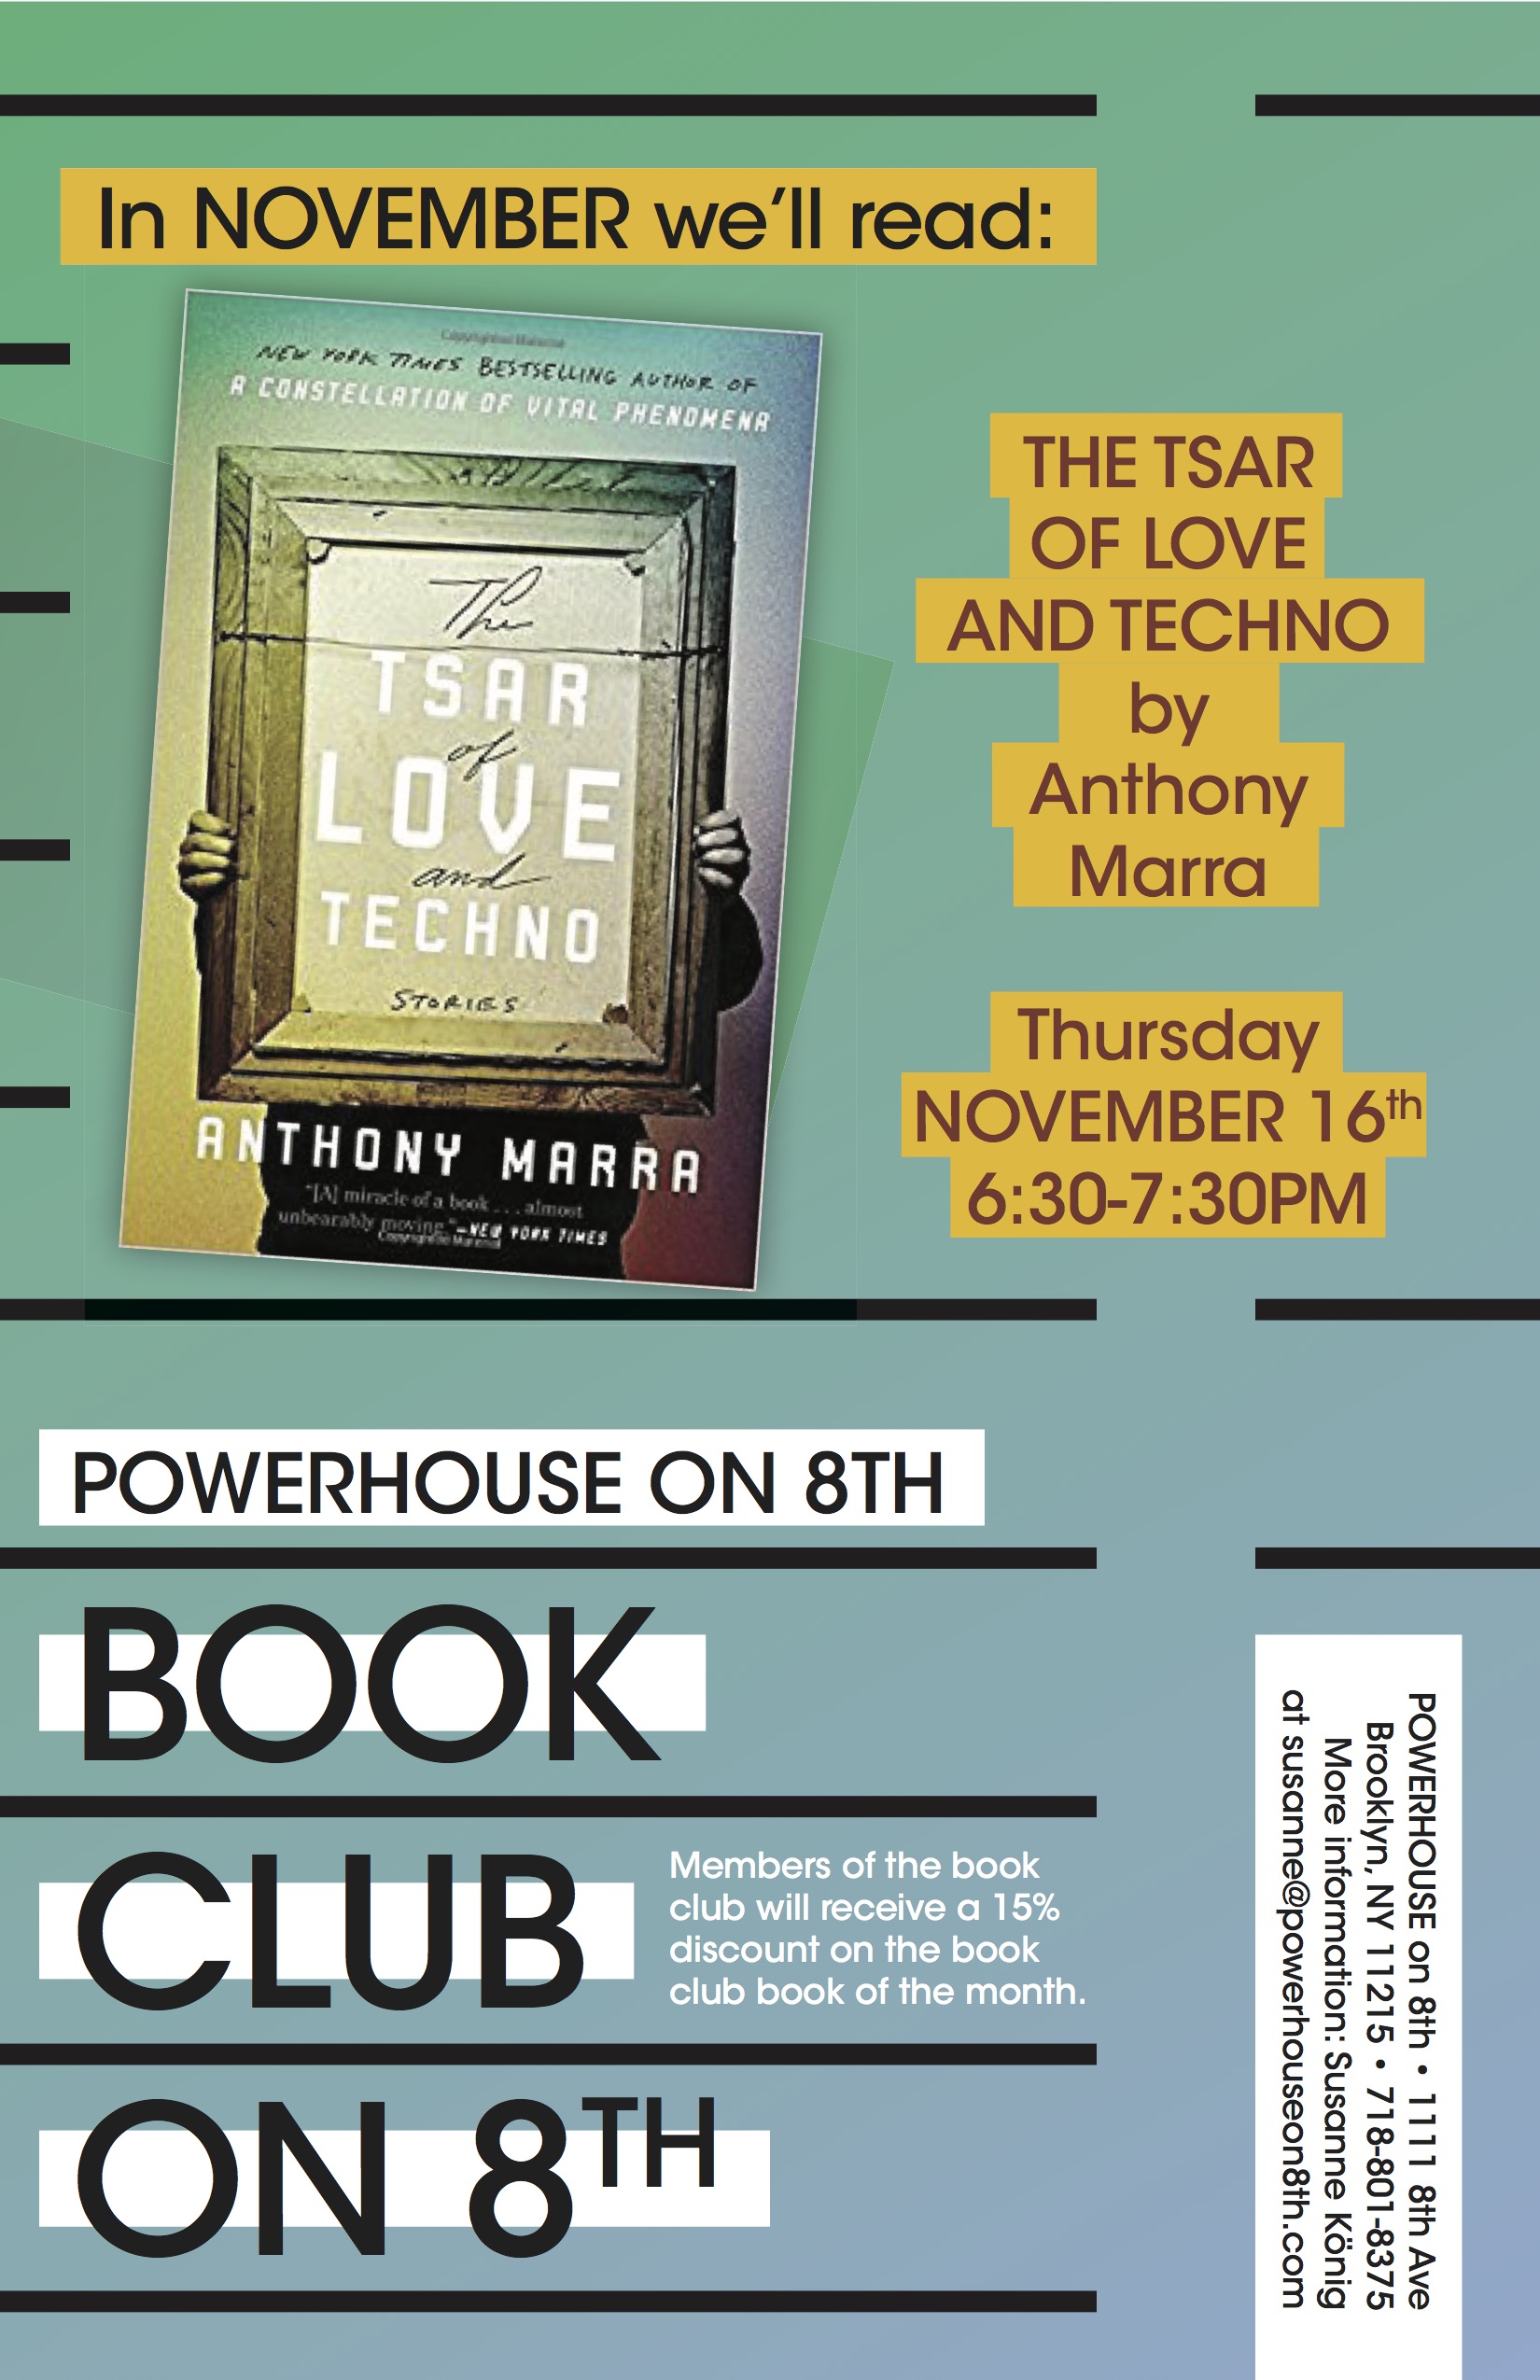 Book Club on 8th: The Tsar of Love by Anthony Marra